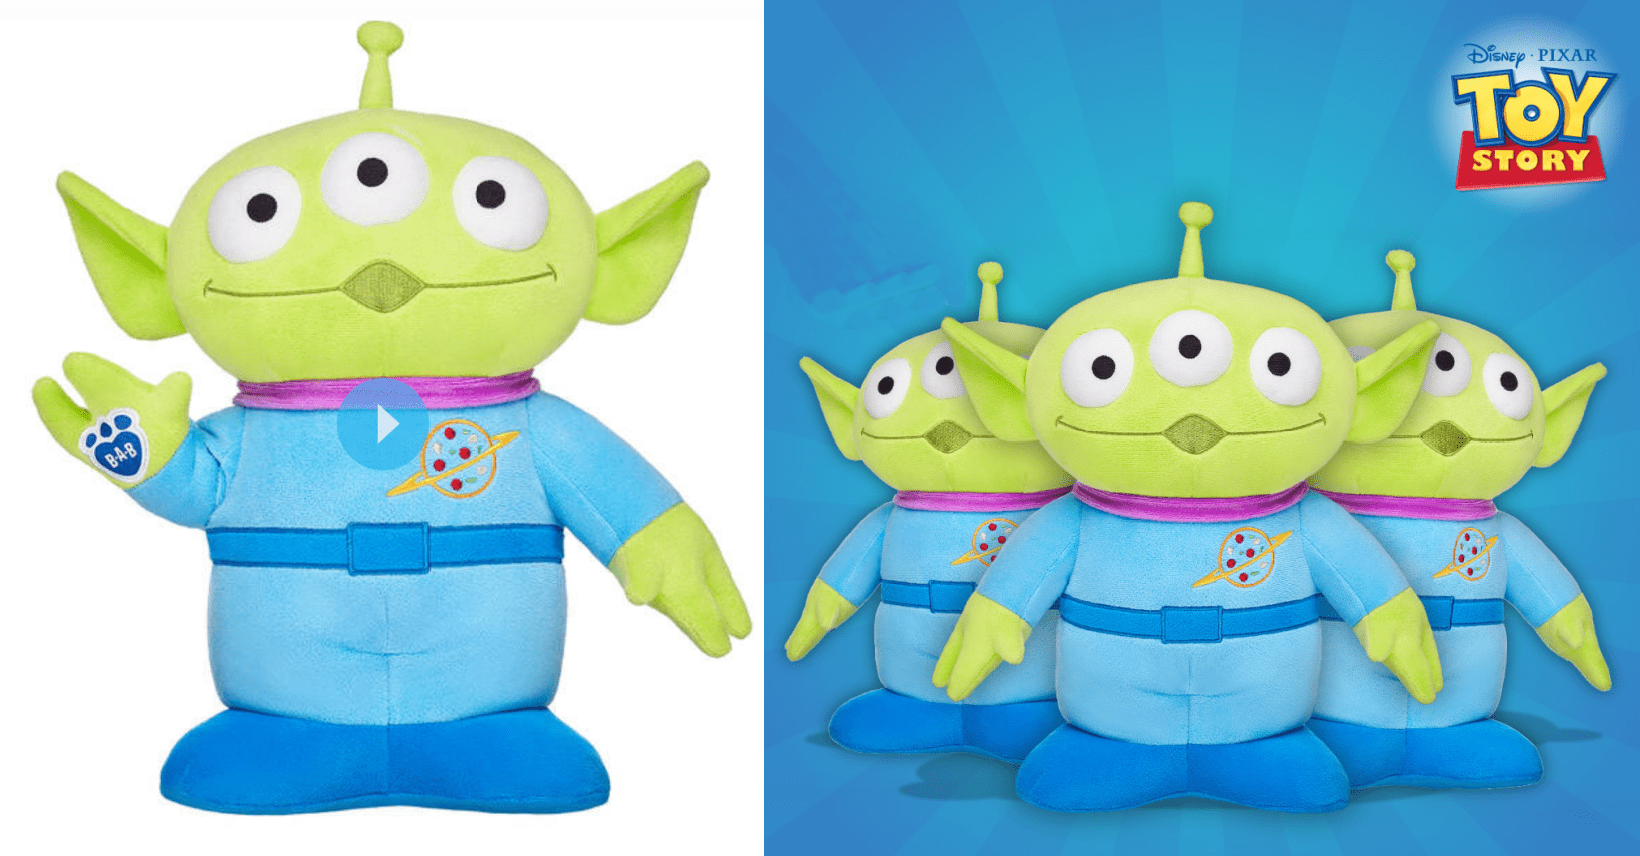 Build-A-Bear Just Released A Toy Story Alien Bear